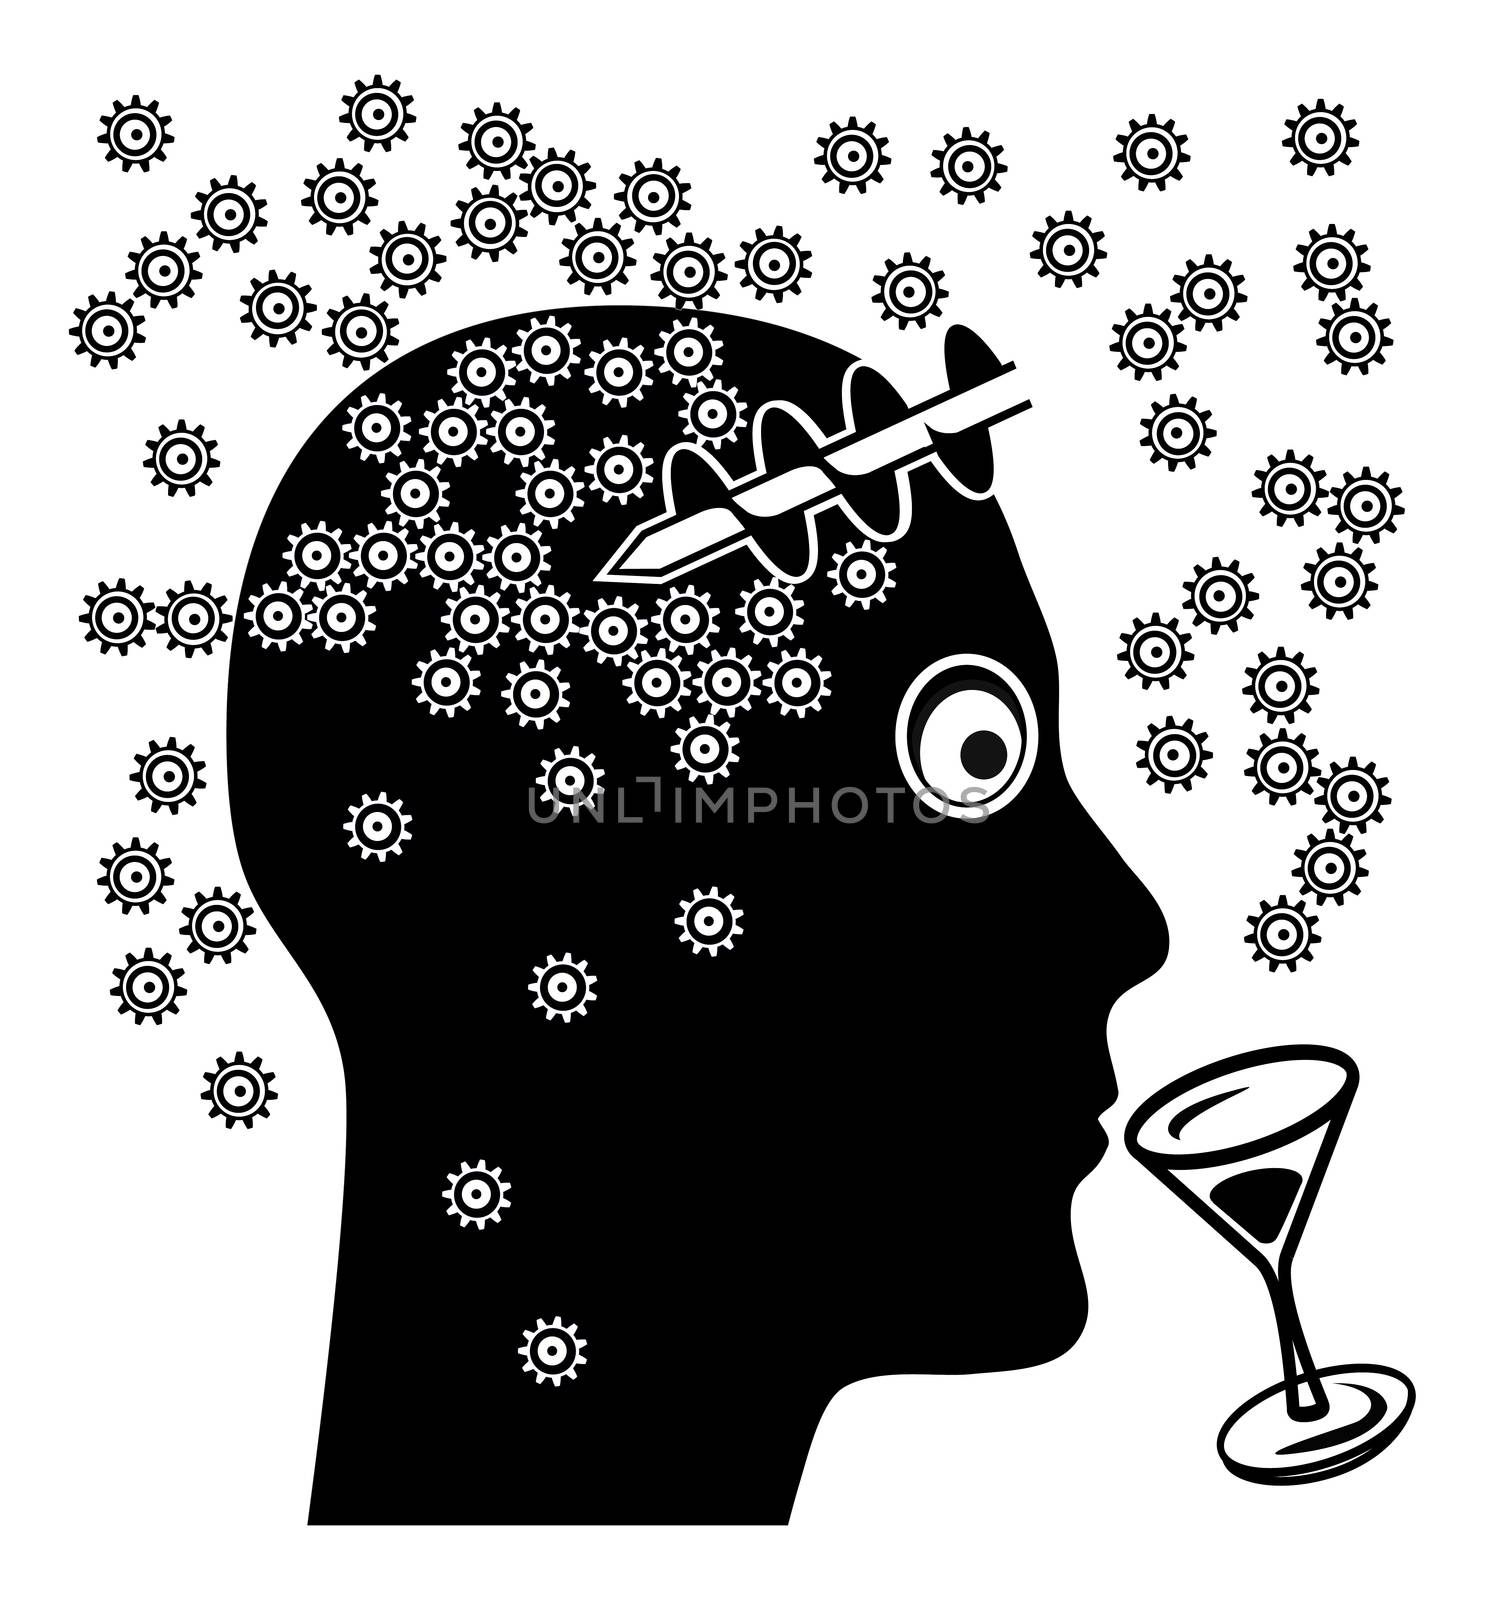 Alcoholic drinks affect the ability to think